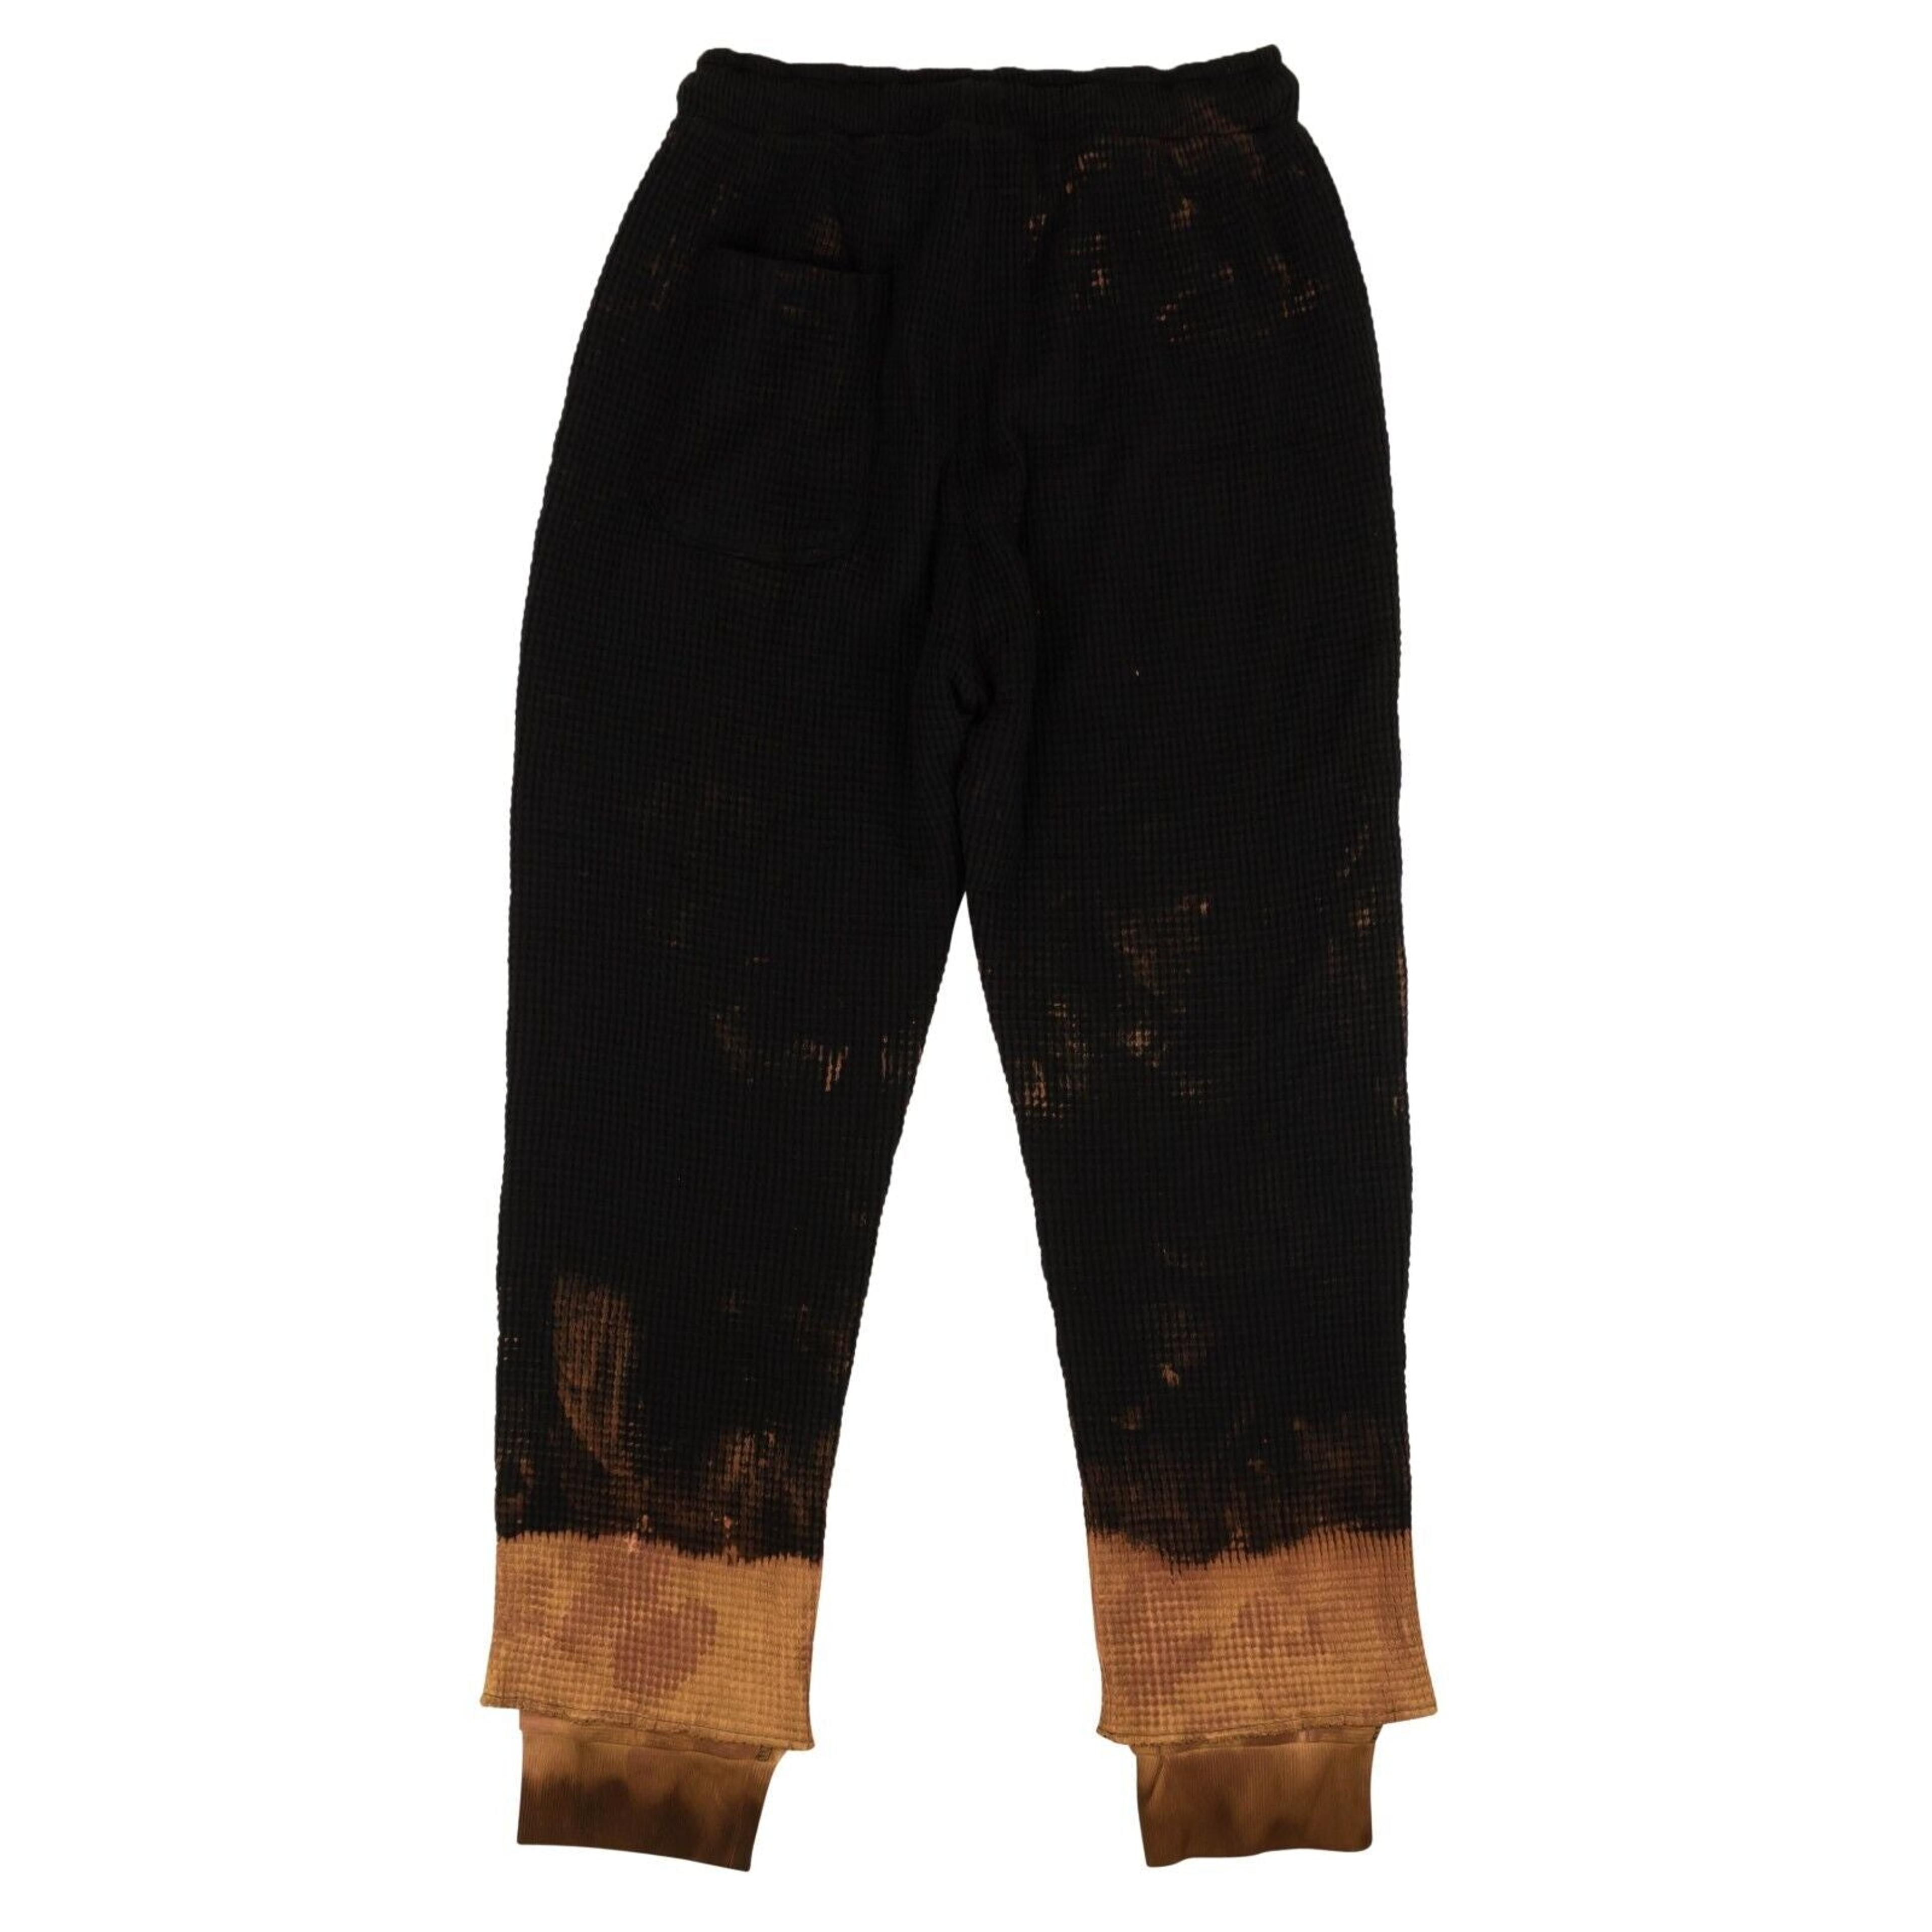 Alternate View 1 of 424 On Fairfax Waffle Knit Double Layer Pants - Black/Brown